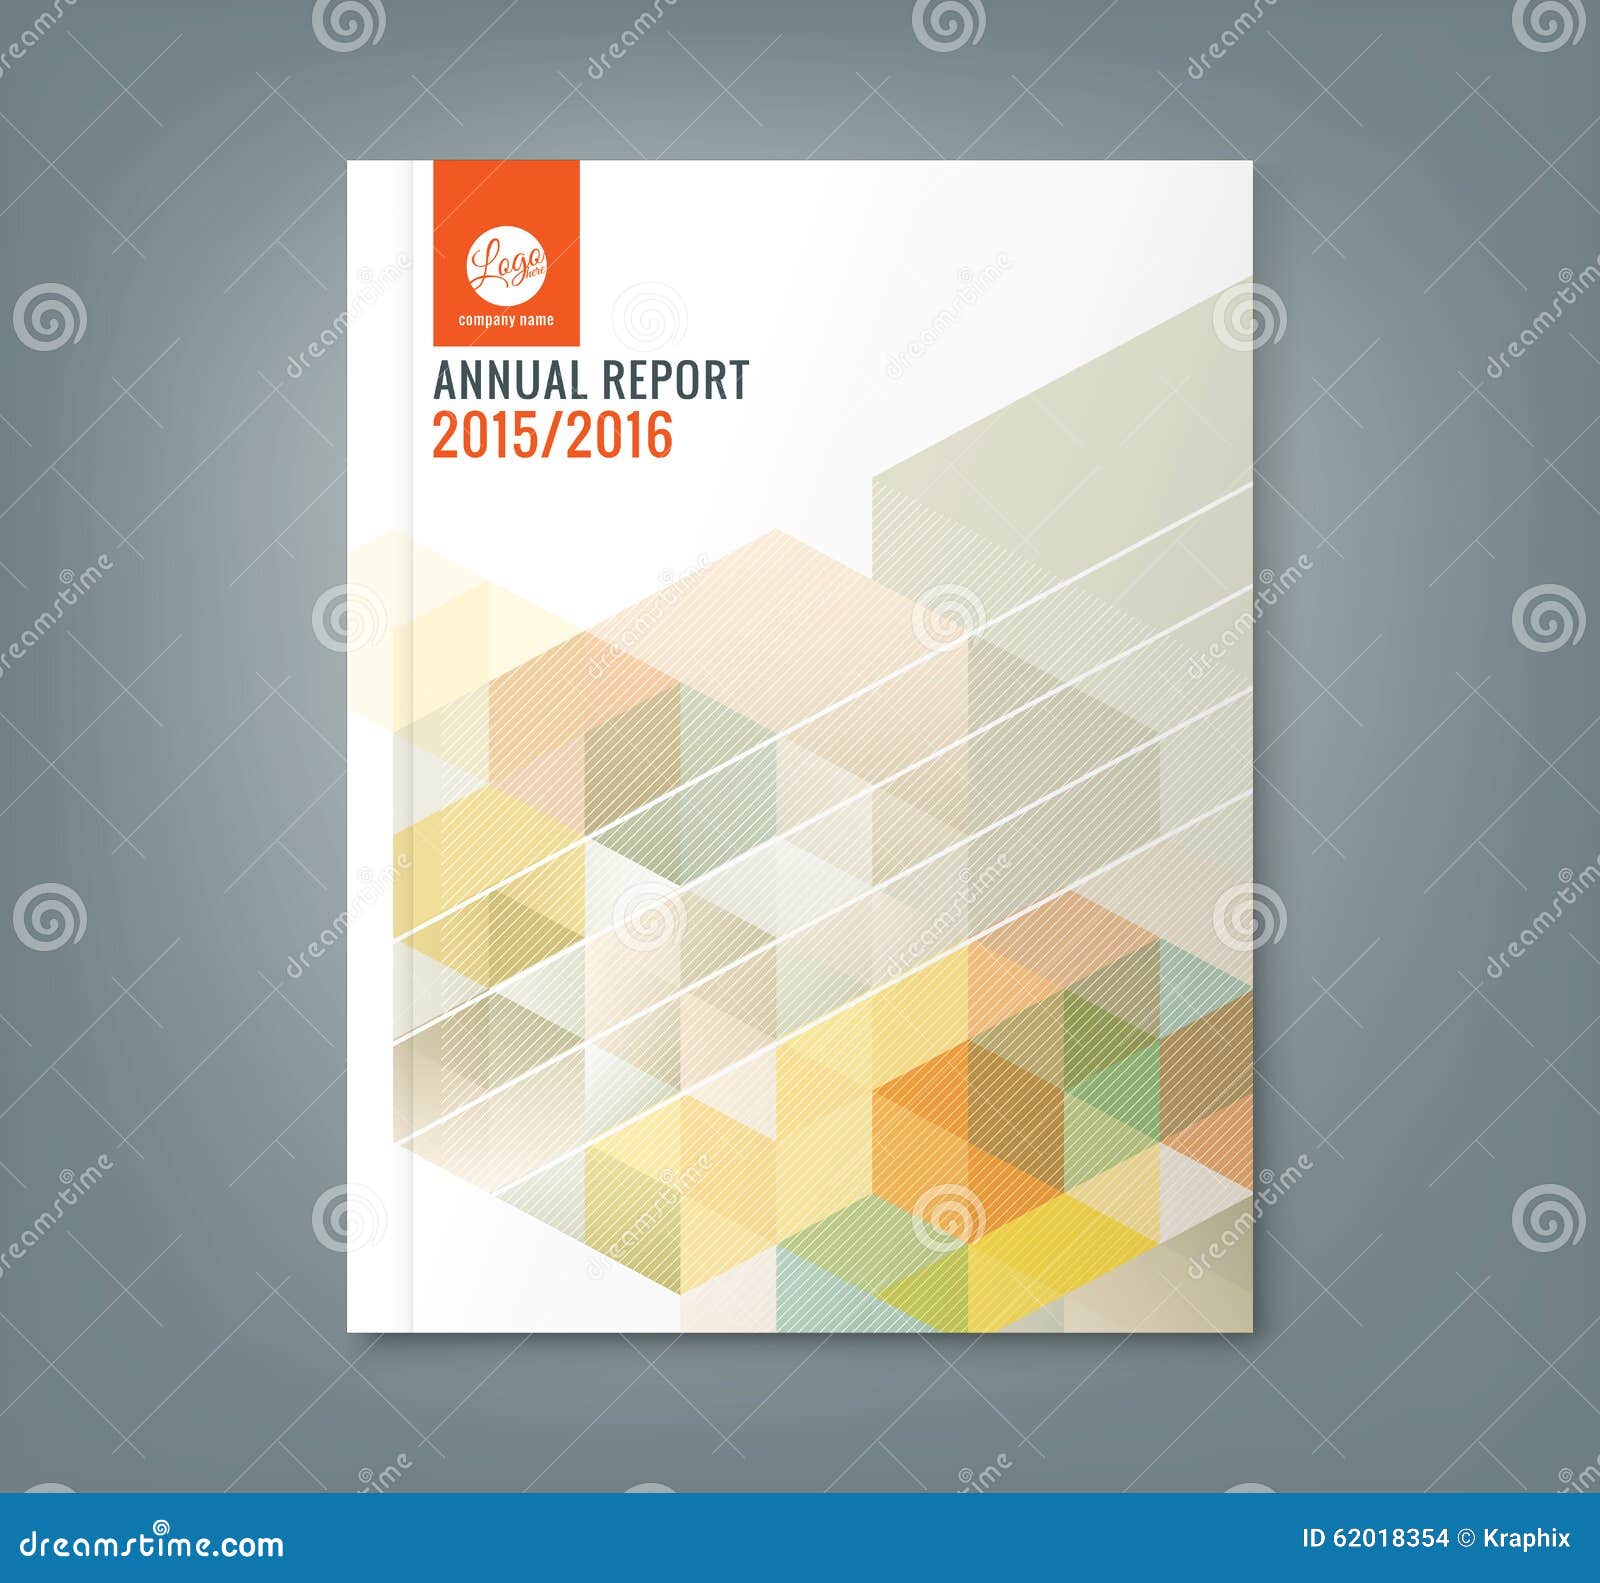 abstract hexagon cube pattern background  for corporate business annual report book cover